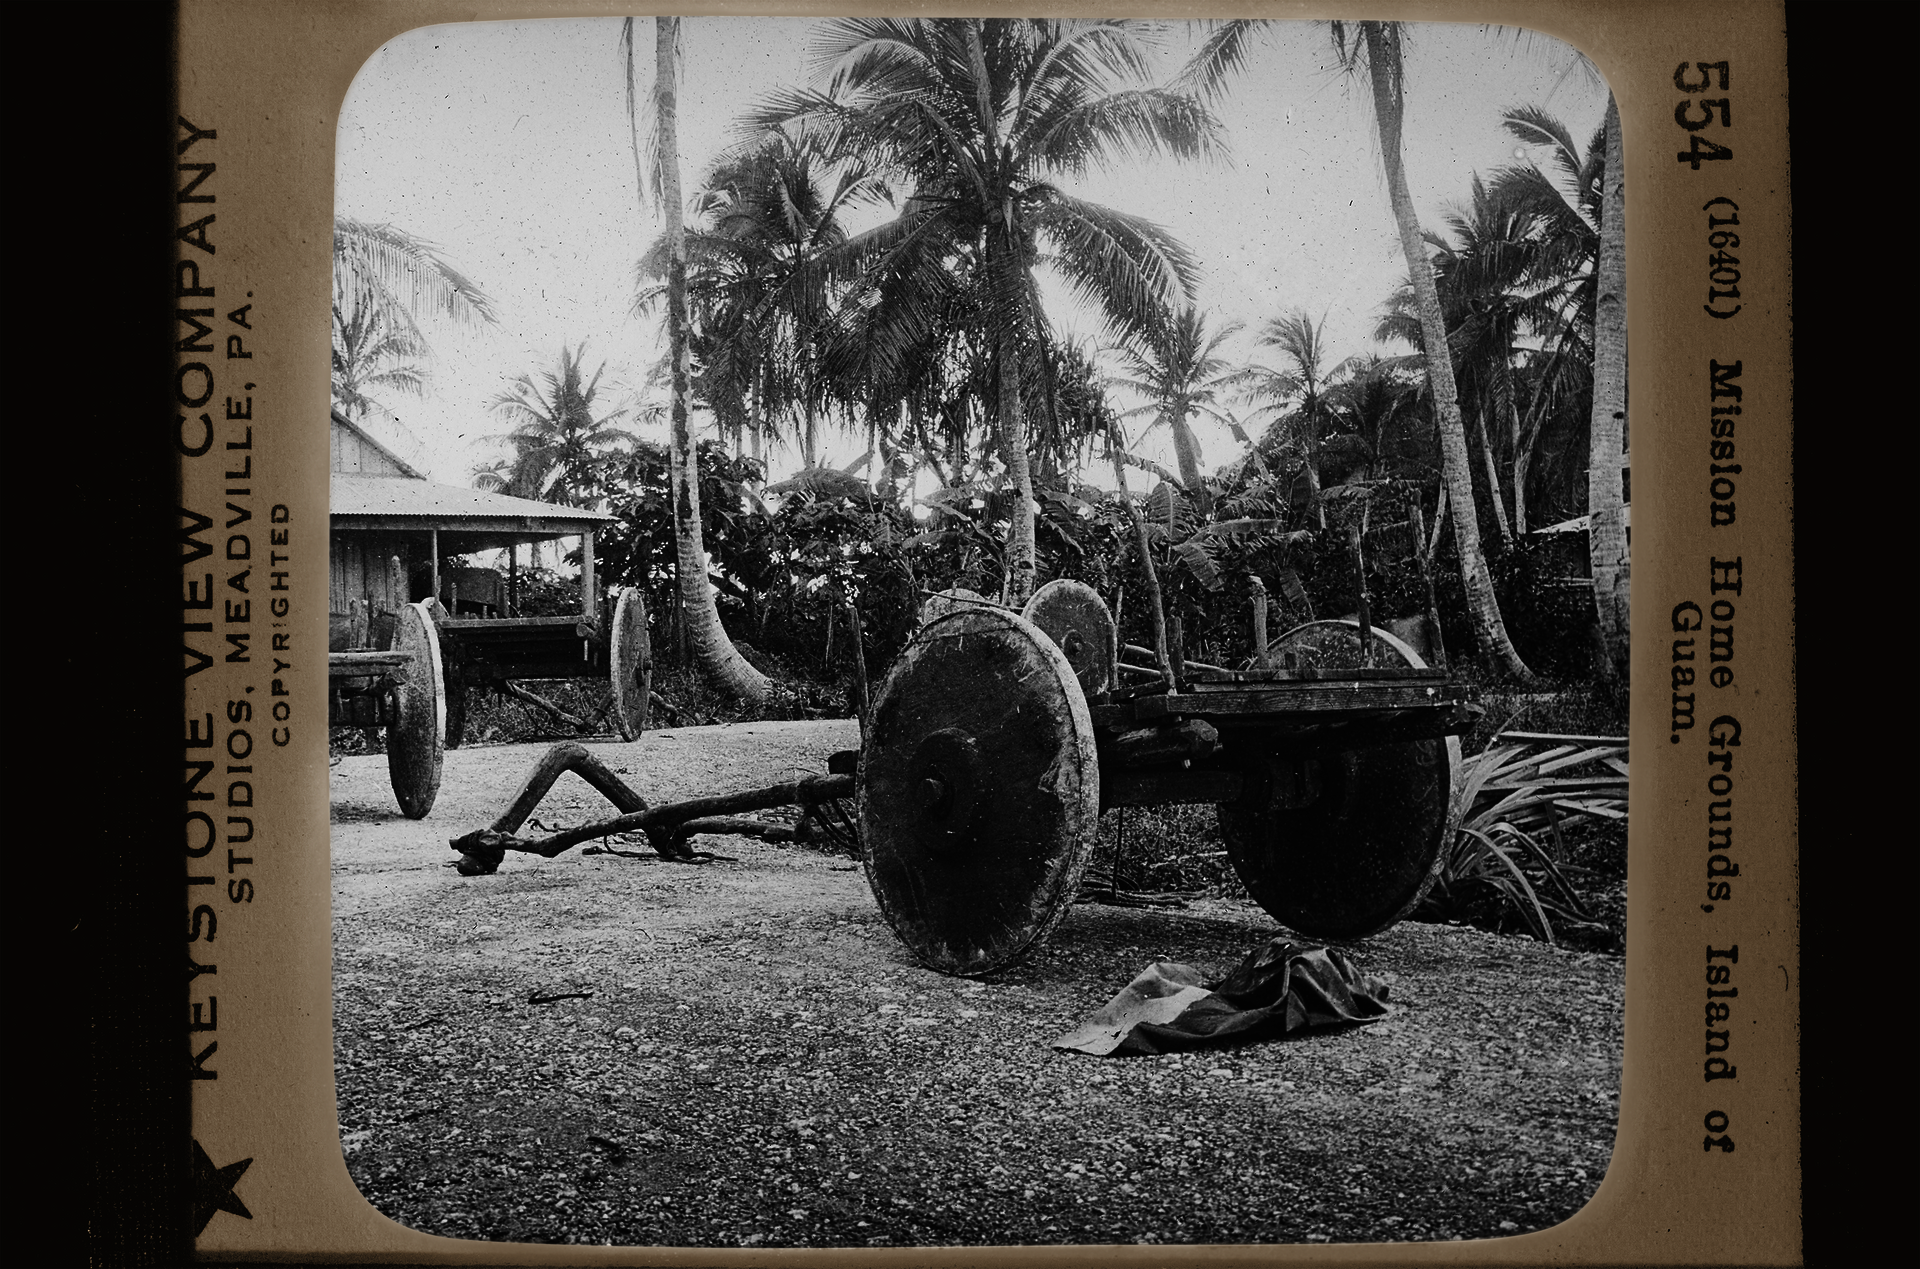 A black and white slide photograph of several 2-wheeled carts with large wooden wheels. A wooden structure with a porch sits in the left of the frame and large palm trees are in the background. Text on the slide frame reads 'Keystone View Company Studios, Meadville, PA. Copyrighted' and '554 (16401) Mission Home Grounds, Island of Guam.'